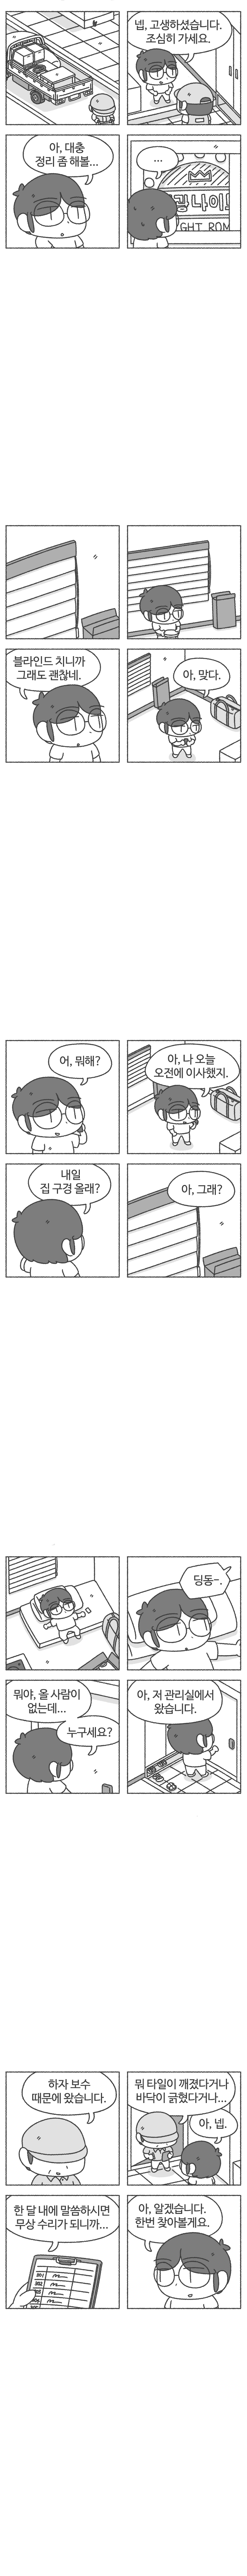 24post.co.kr_016.png